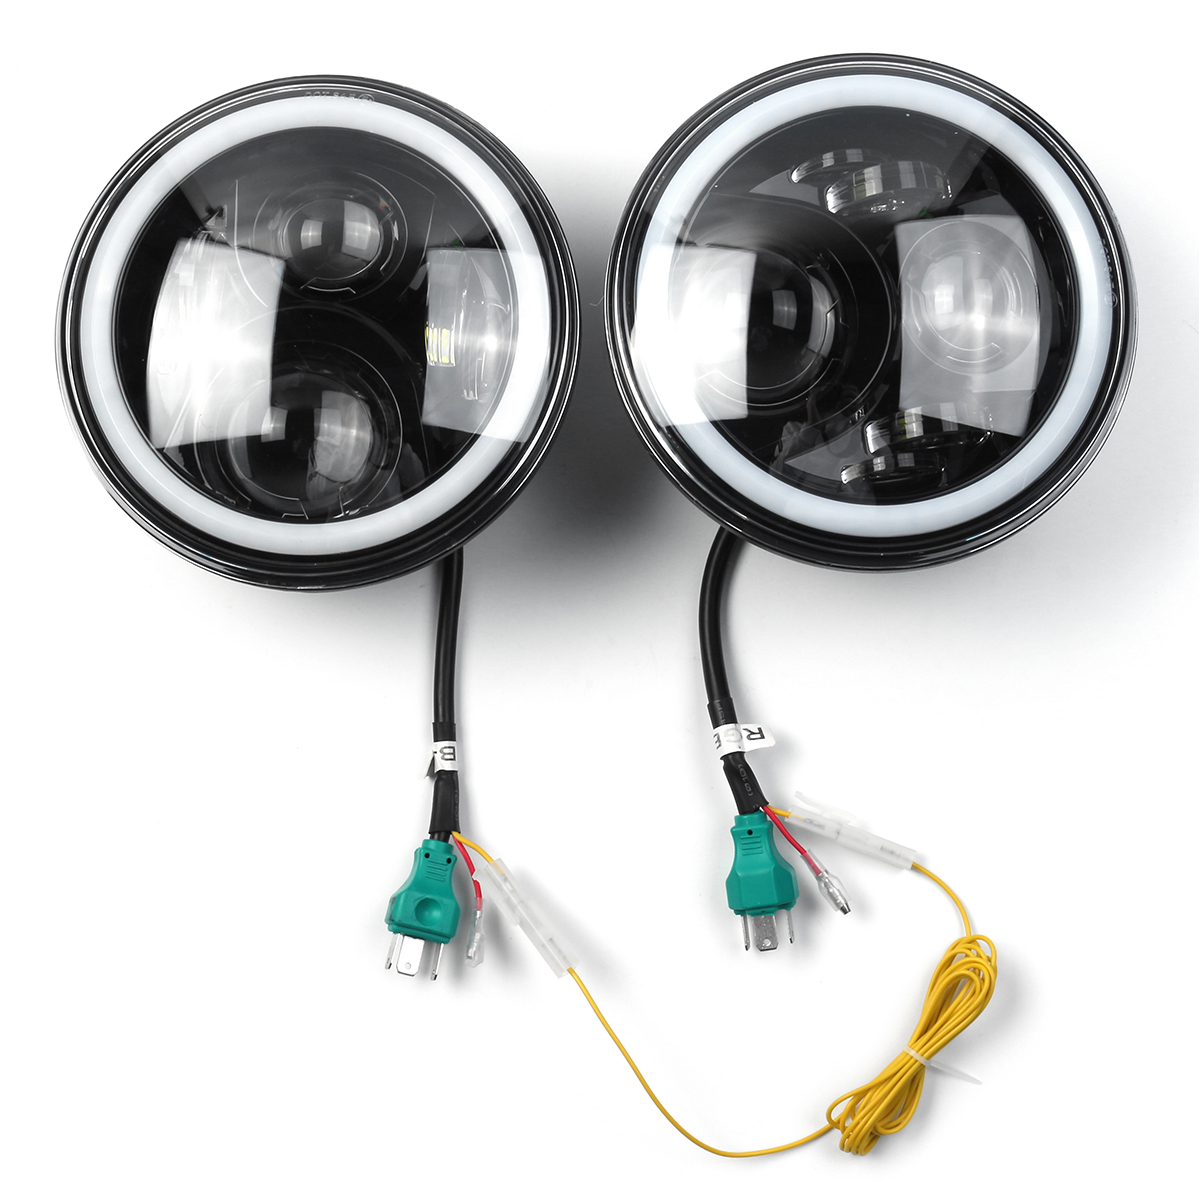 Pair 7 Inch 19 RGB LED Car Headlights IP67 Built-In Lamp Automatic Change Halo Angel Eyes for the Jeep Wrangler Landrover Defender Hummer